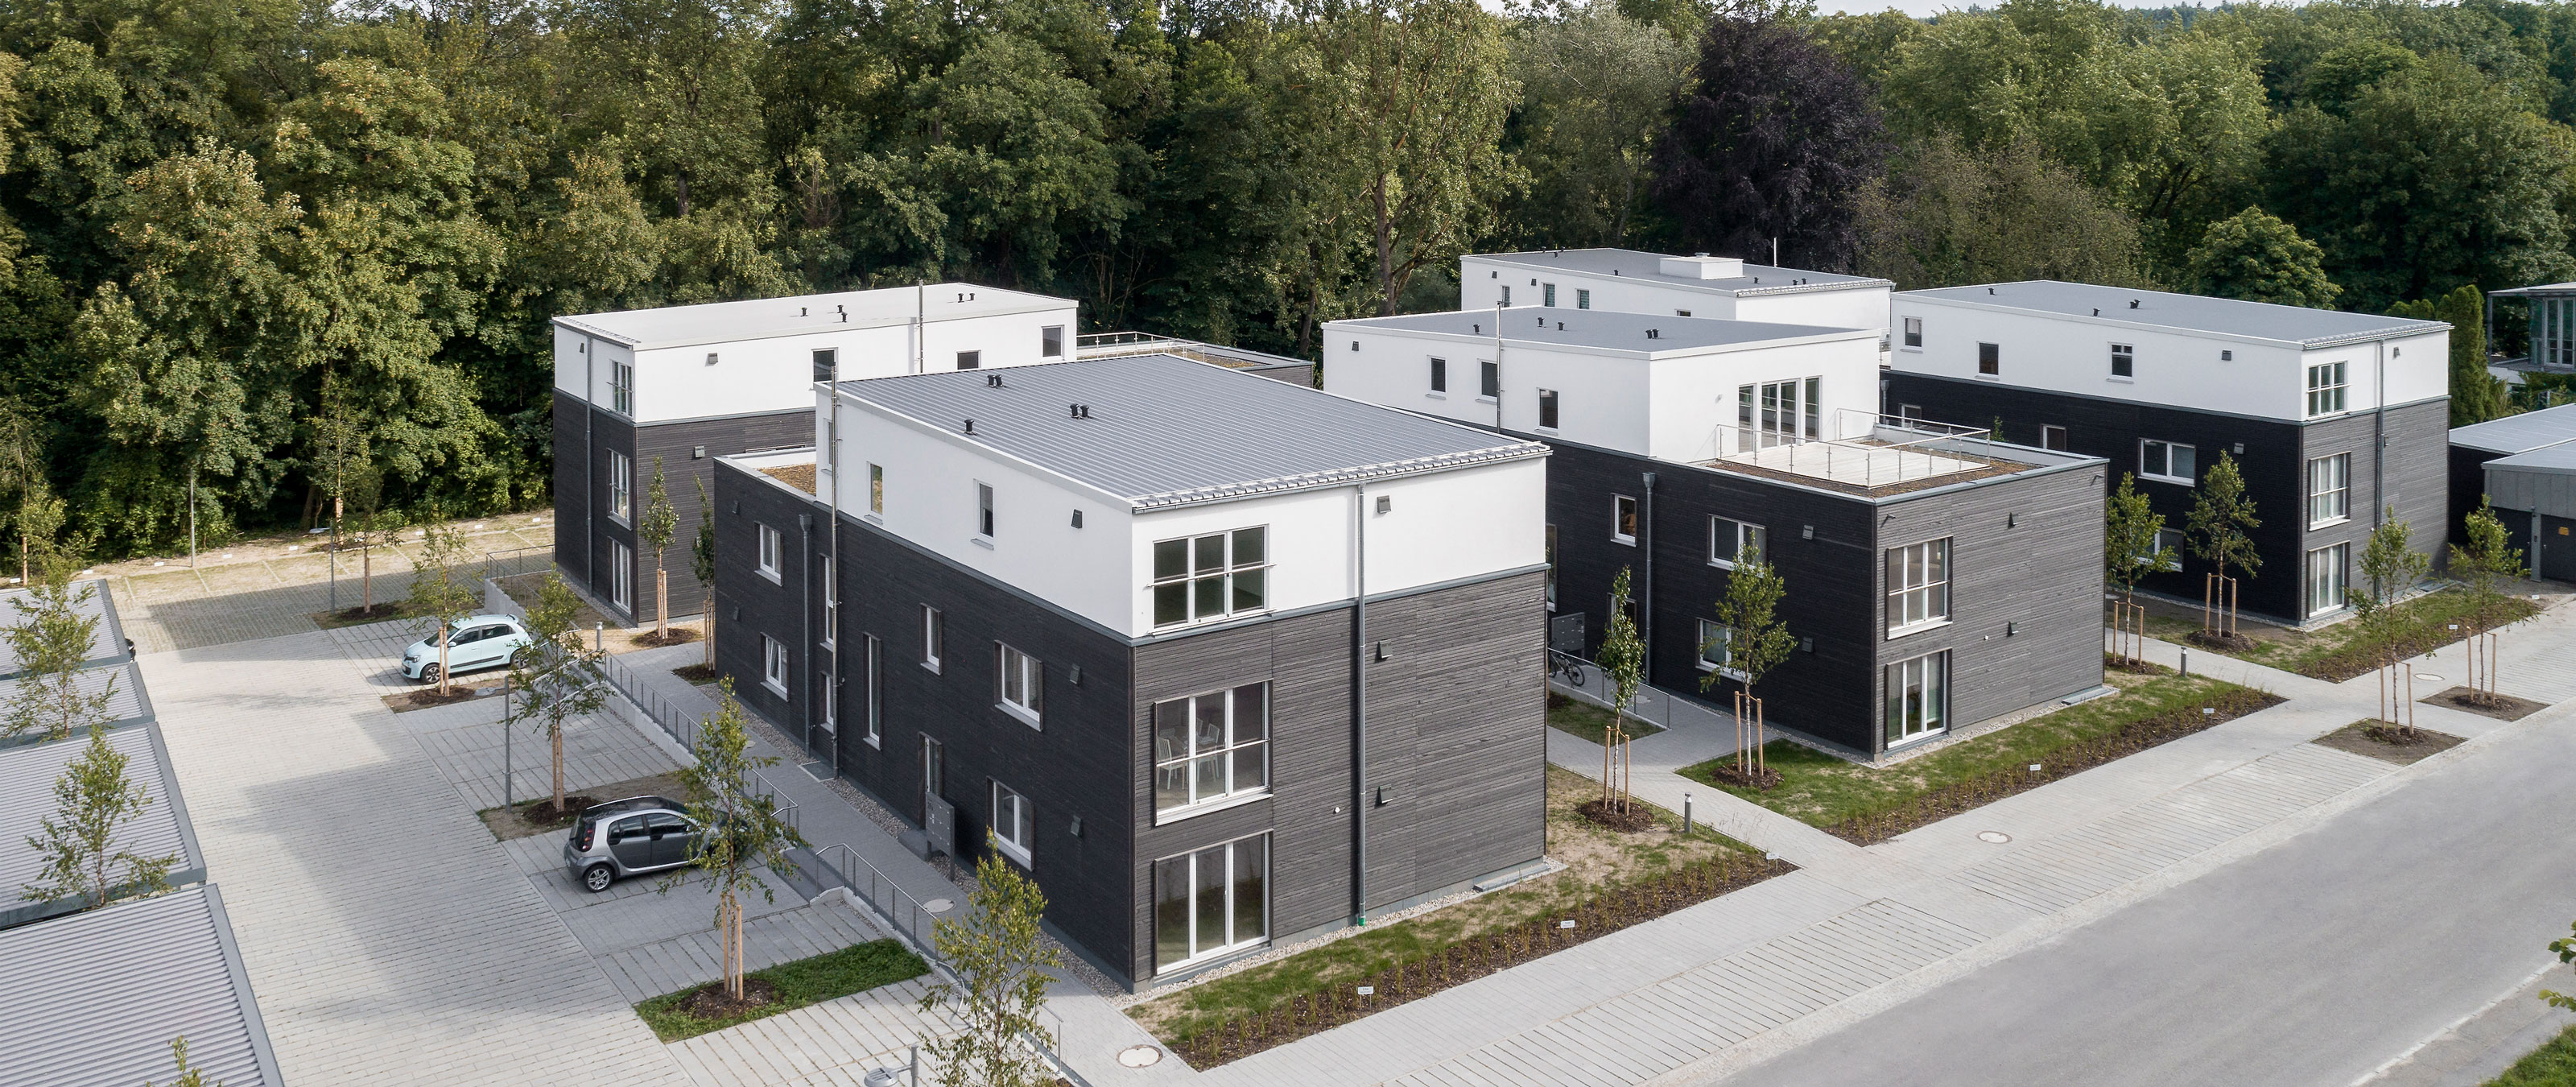 34 modern apartments distributed across four houses with pre-grayed timber casing in the newly built Donau residential community. Author: © Oliver Jaist